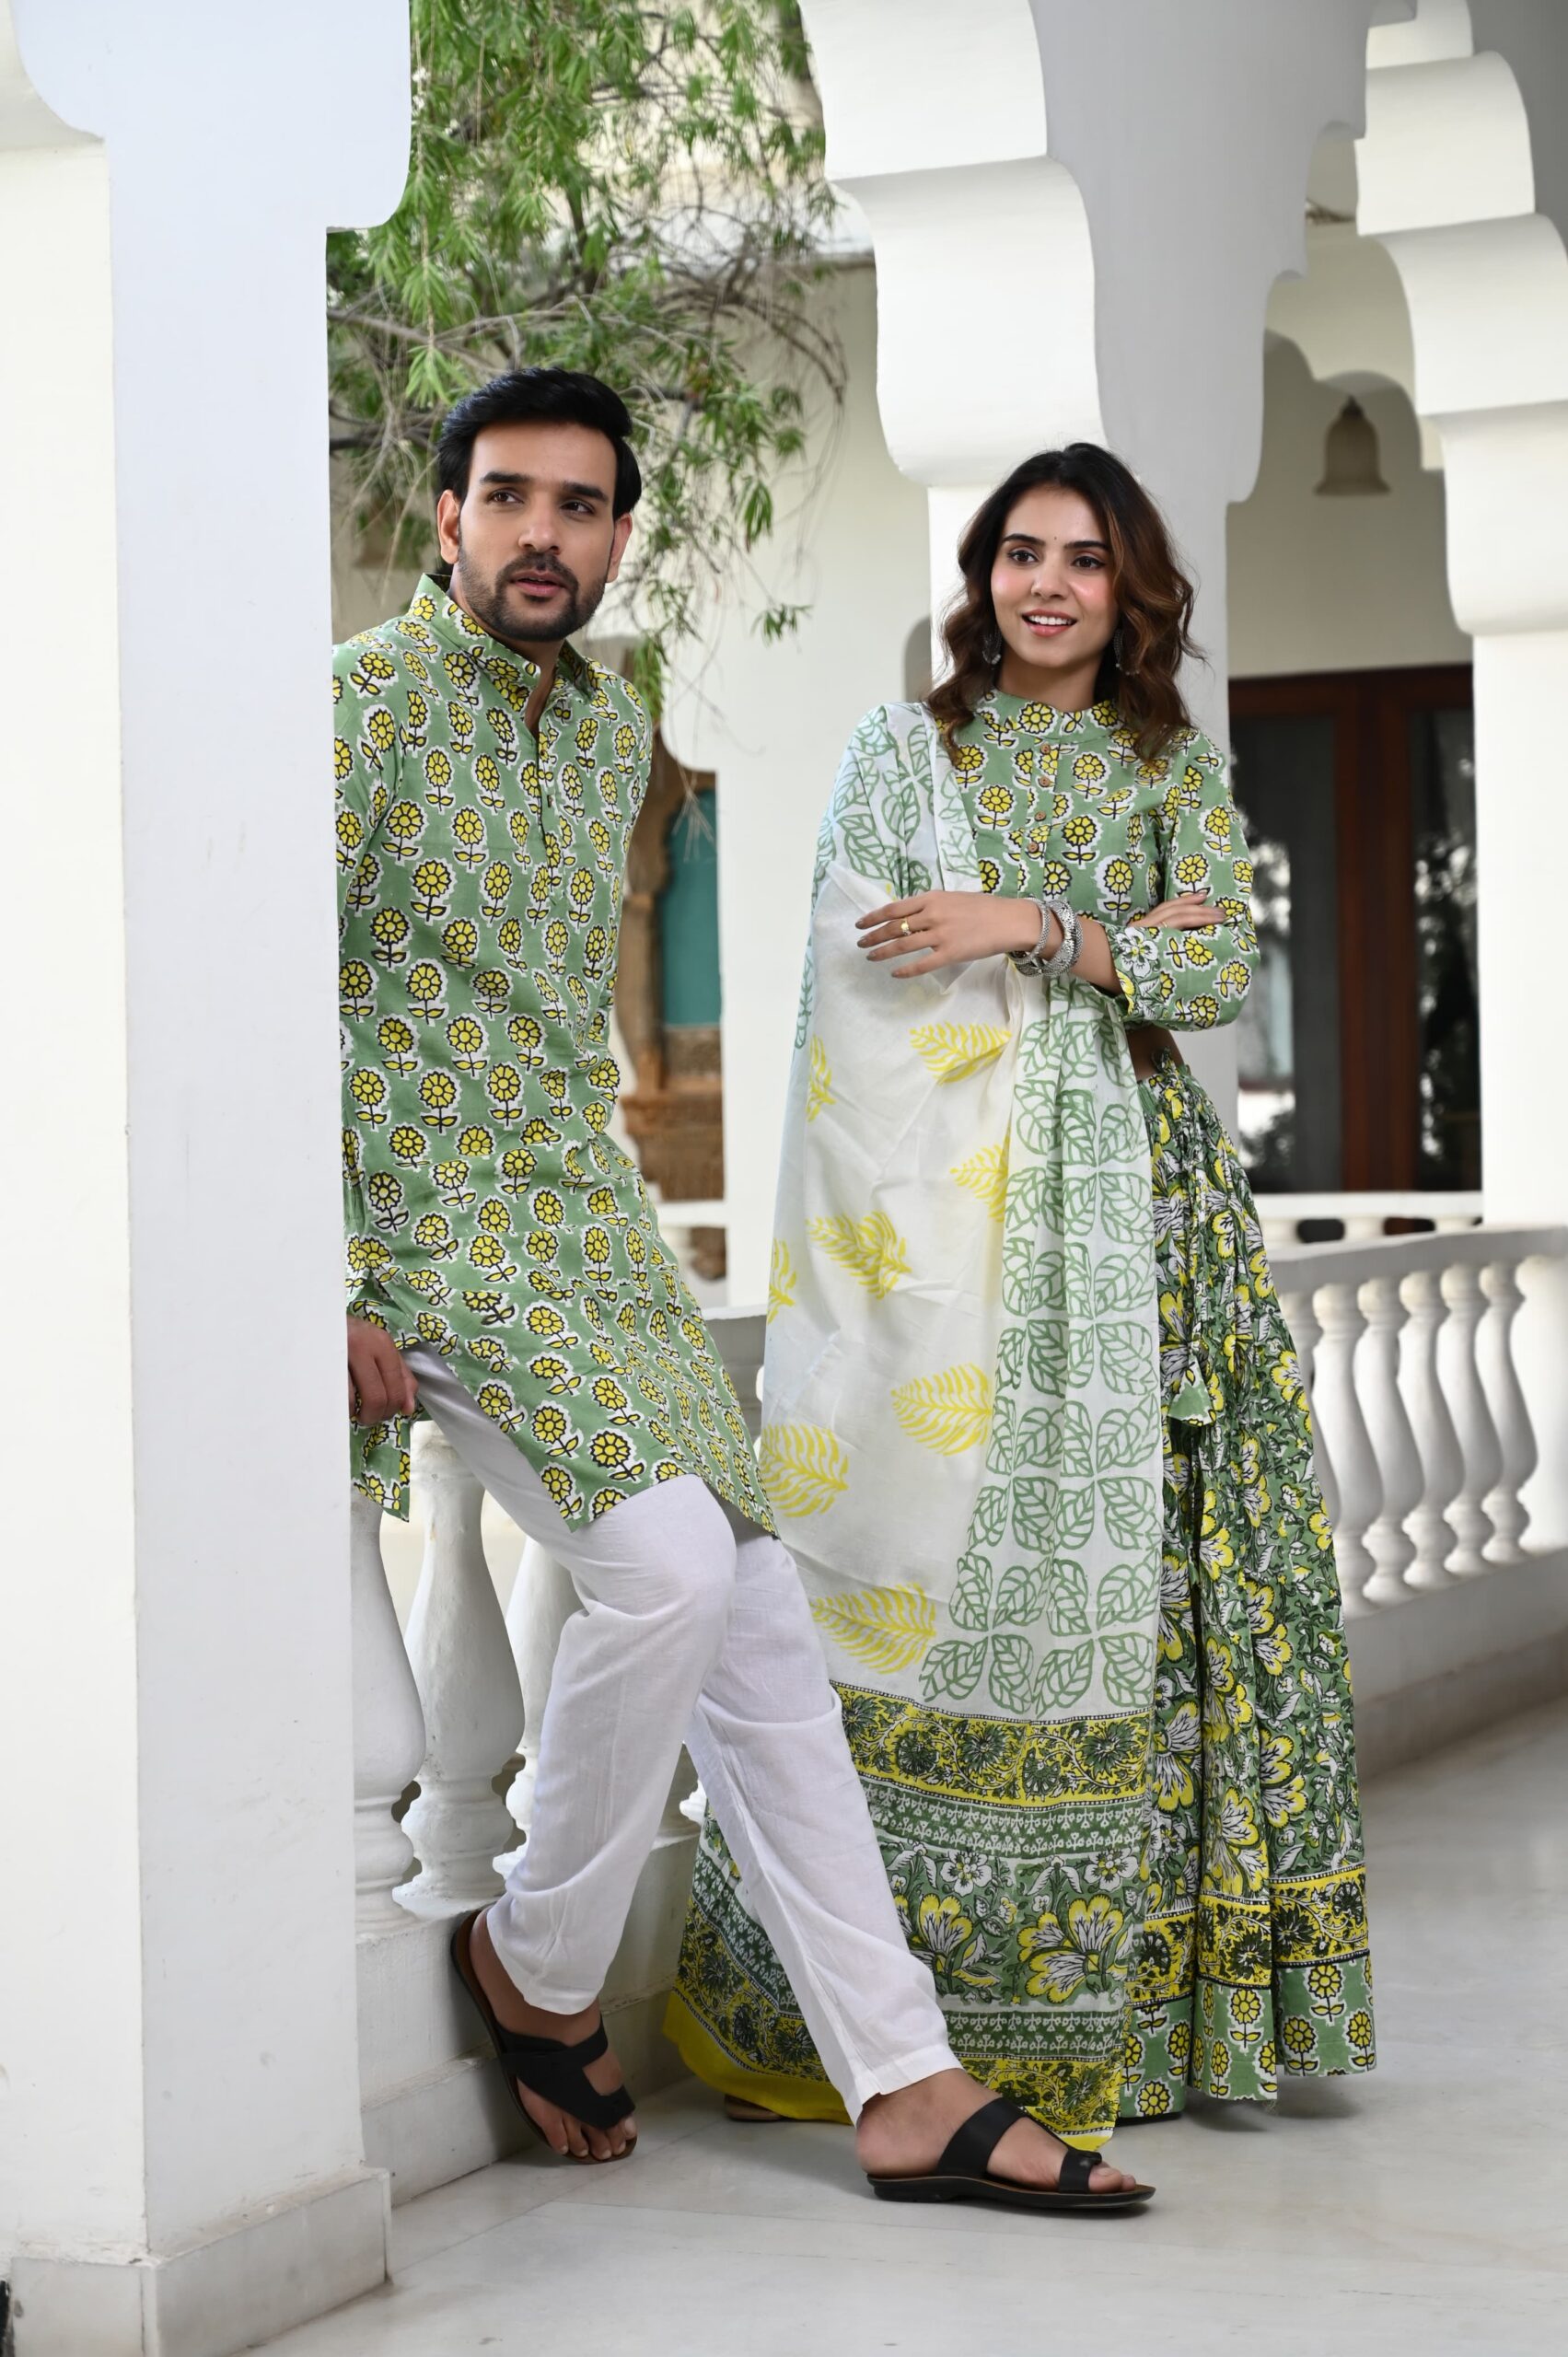 Cream Kurta Digital Print With Single Thread Work Aligadhi Pant | Dress  suits for men, Trendy outfits, Jacket style